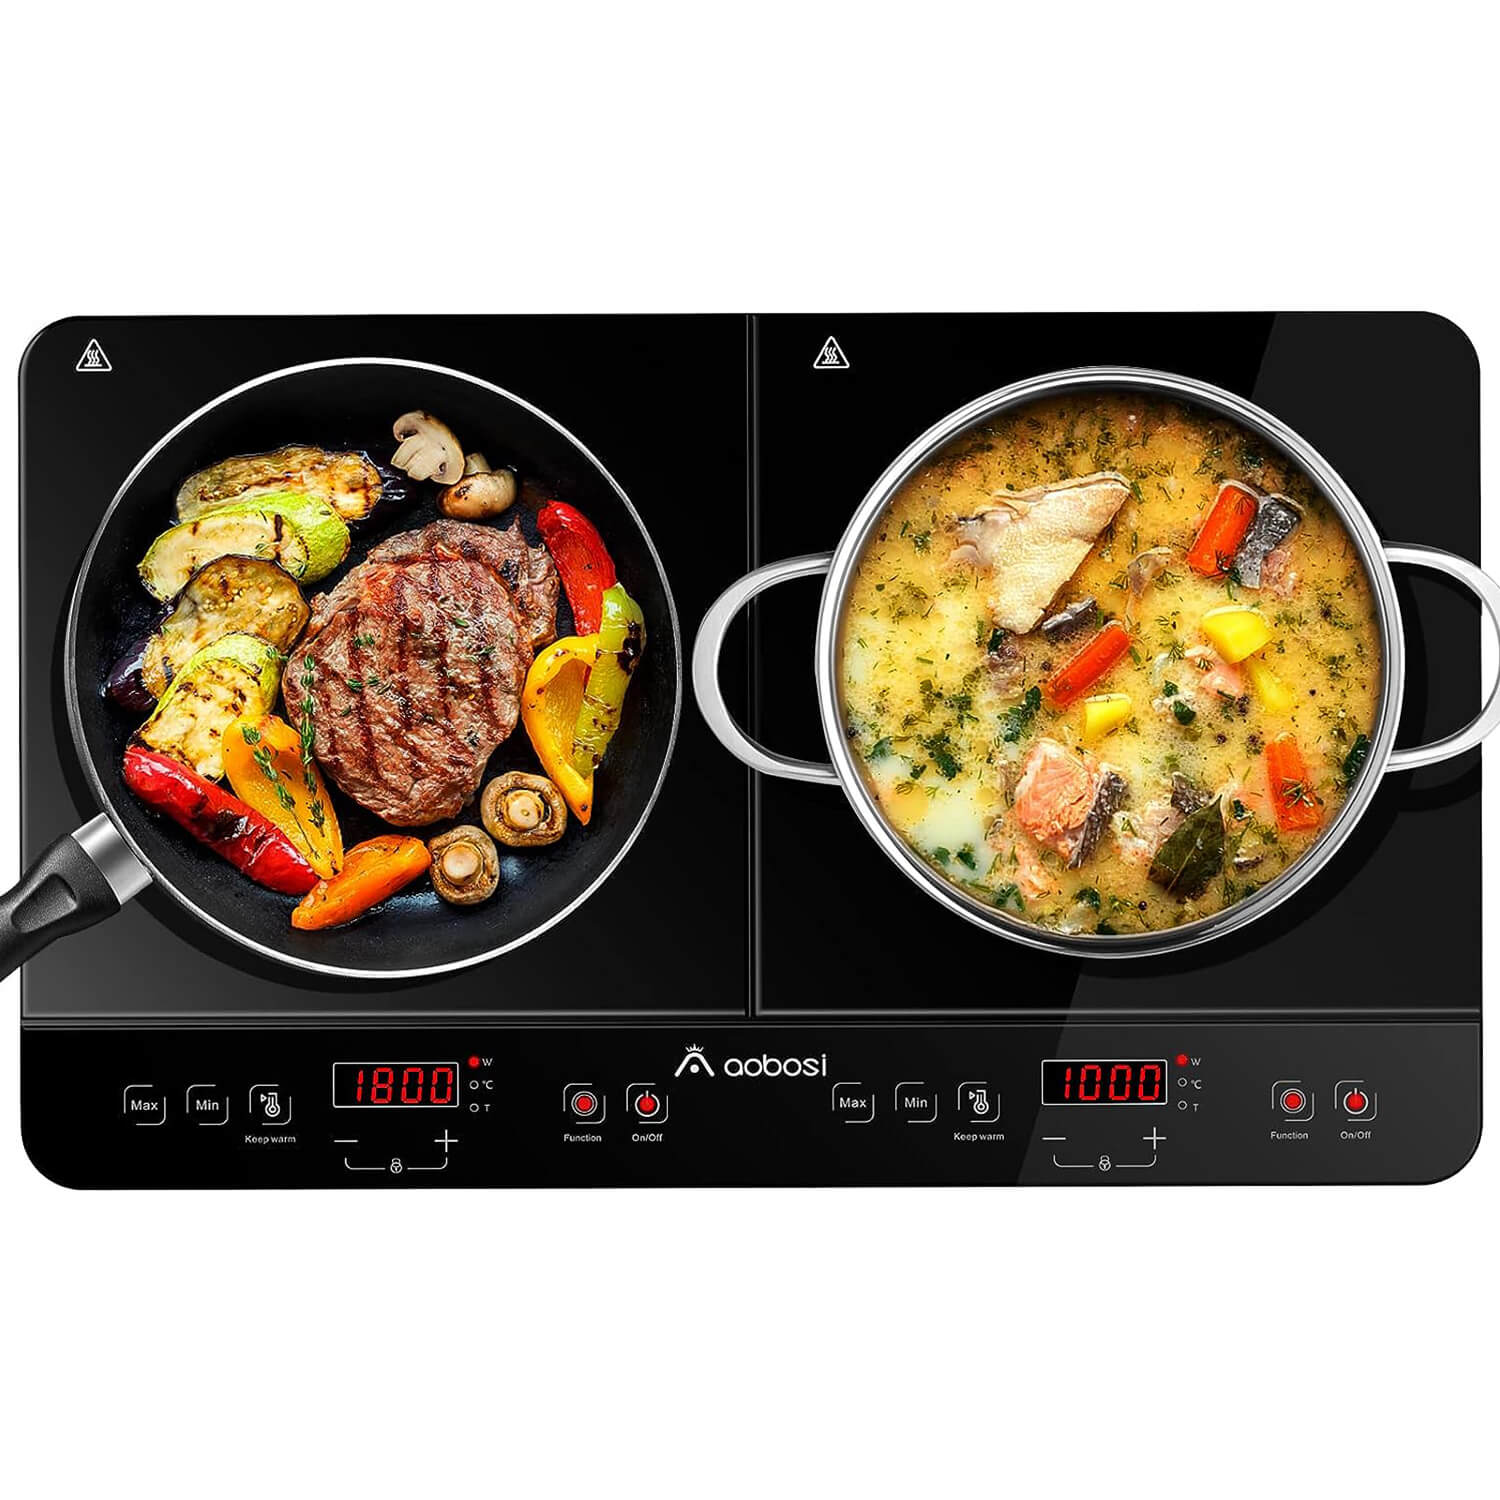 Aobosi Electric Double Induction Cooktop With 2 With Magnetic